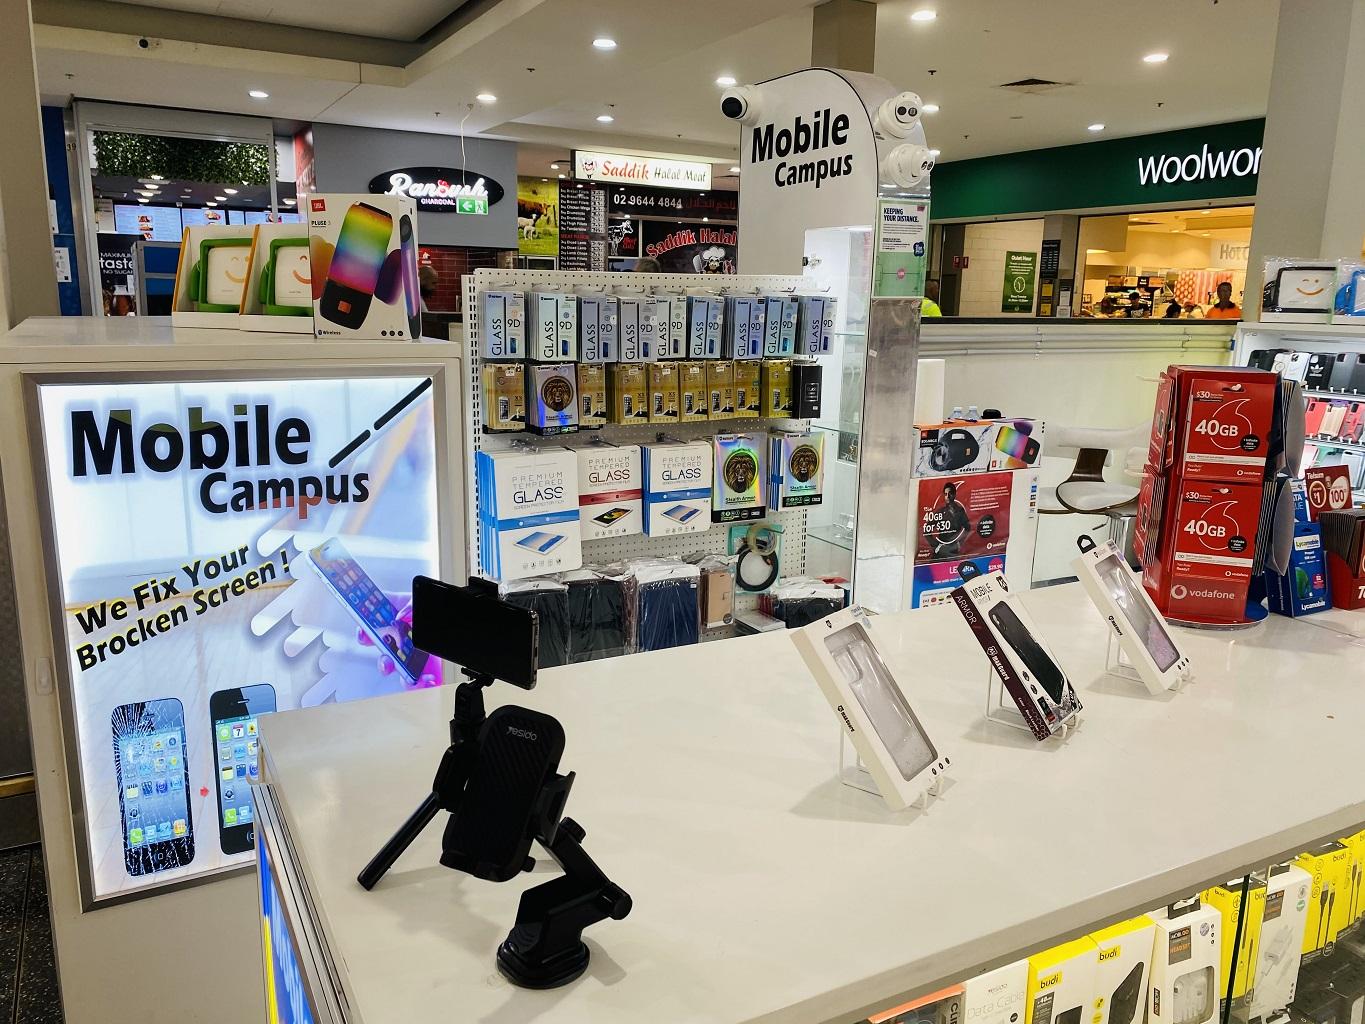 Mobile Campus Chester Hill | Shop k3/1 Leicester St, Chester Hill NSW 2162, Australi | Phone: 0410 515 442